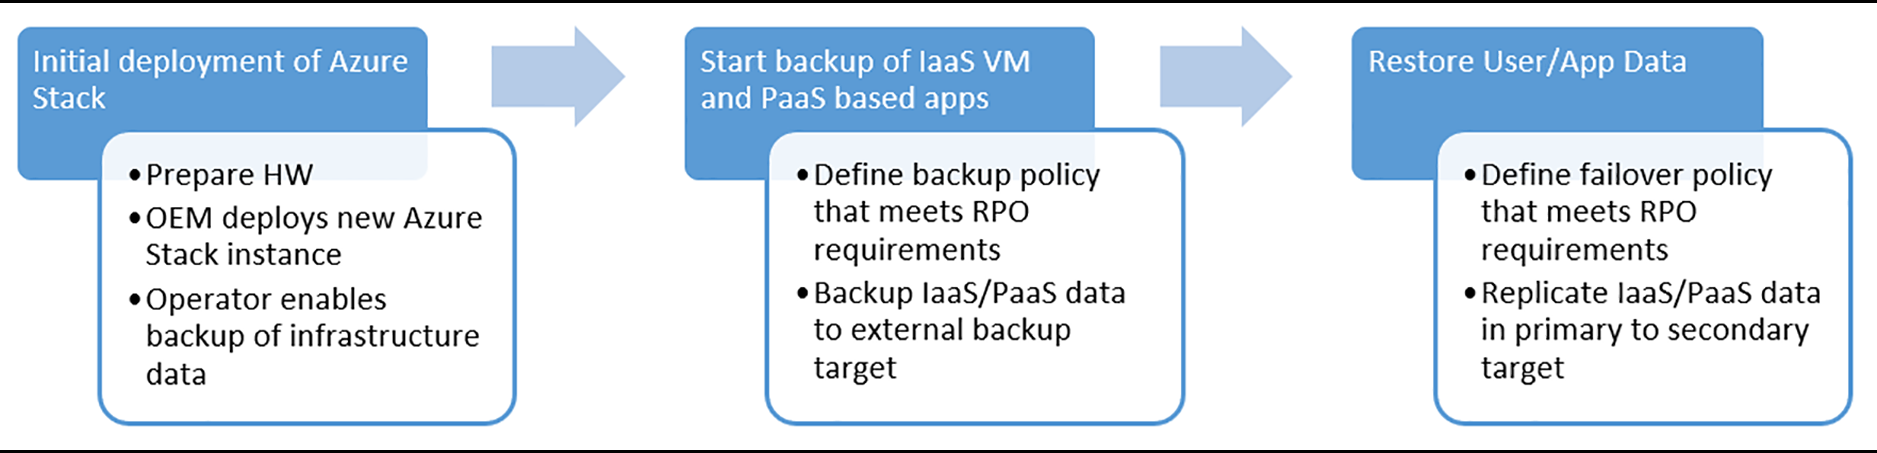 Azure Stack Hub data recovery workflow - Deployment